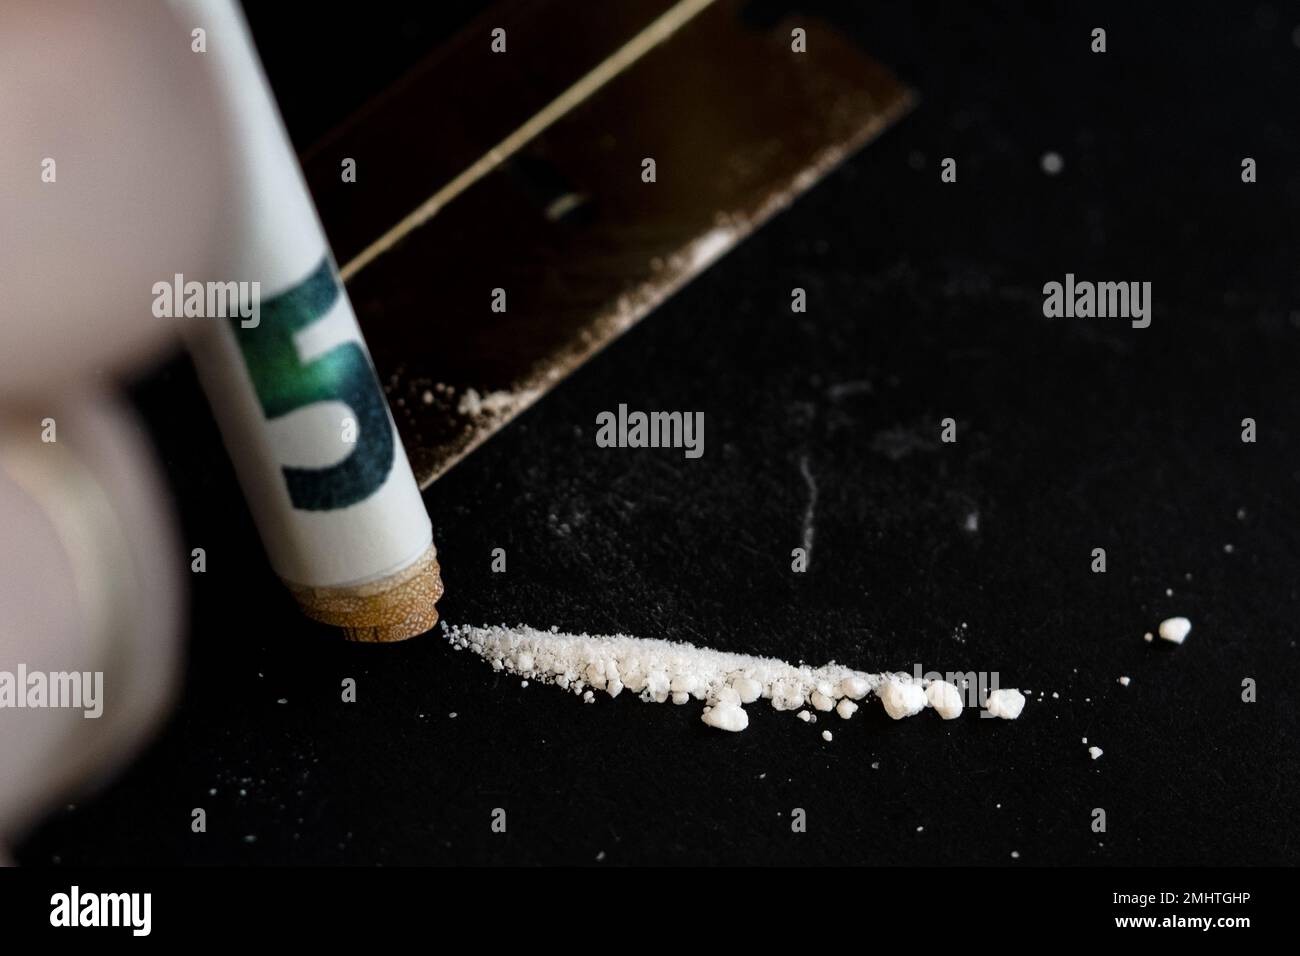 1,343 Cocaine Test Royalty-Free Photos and Stock Images